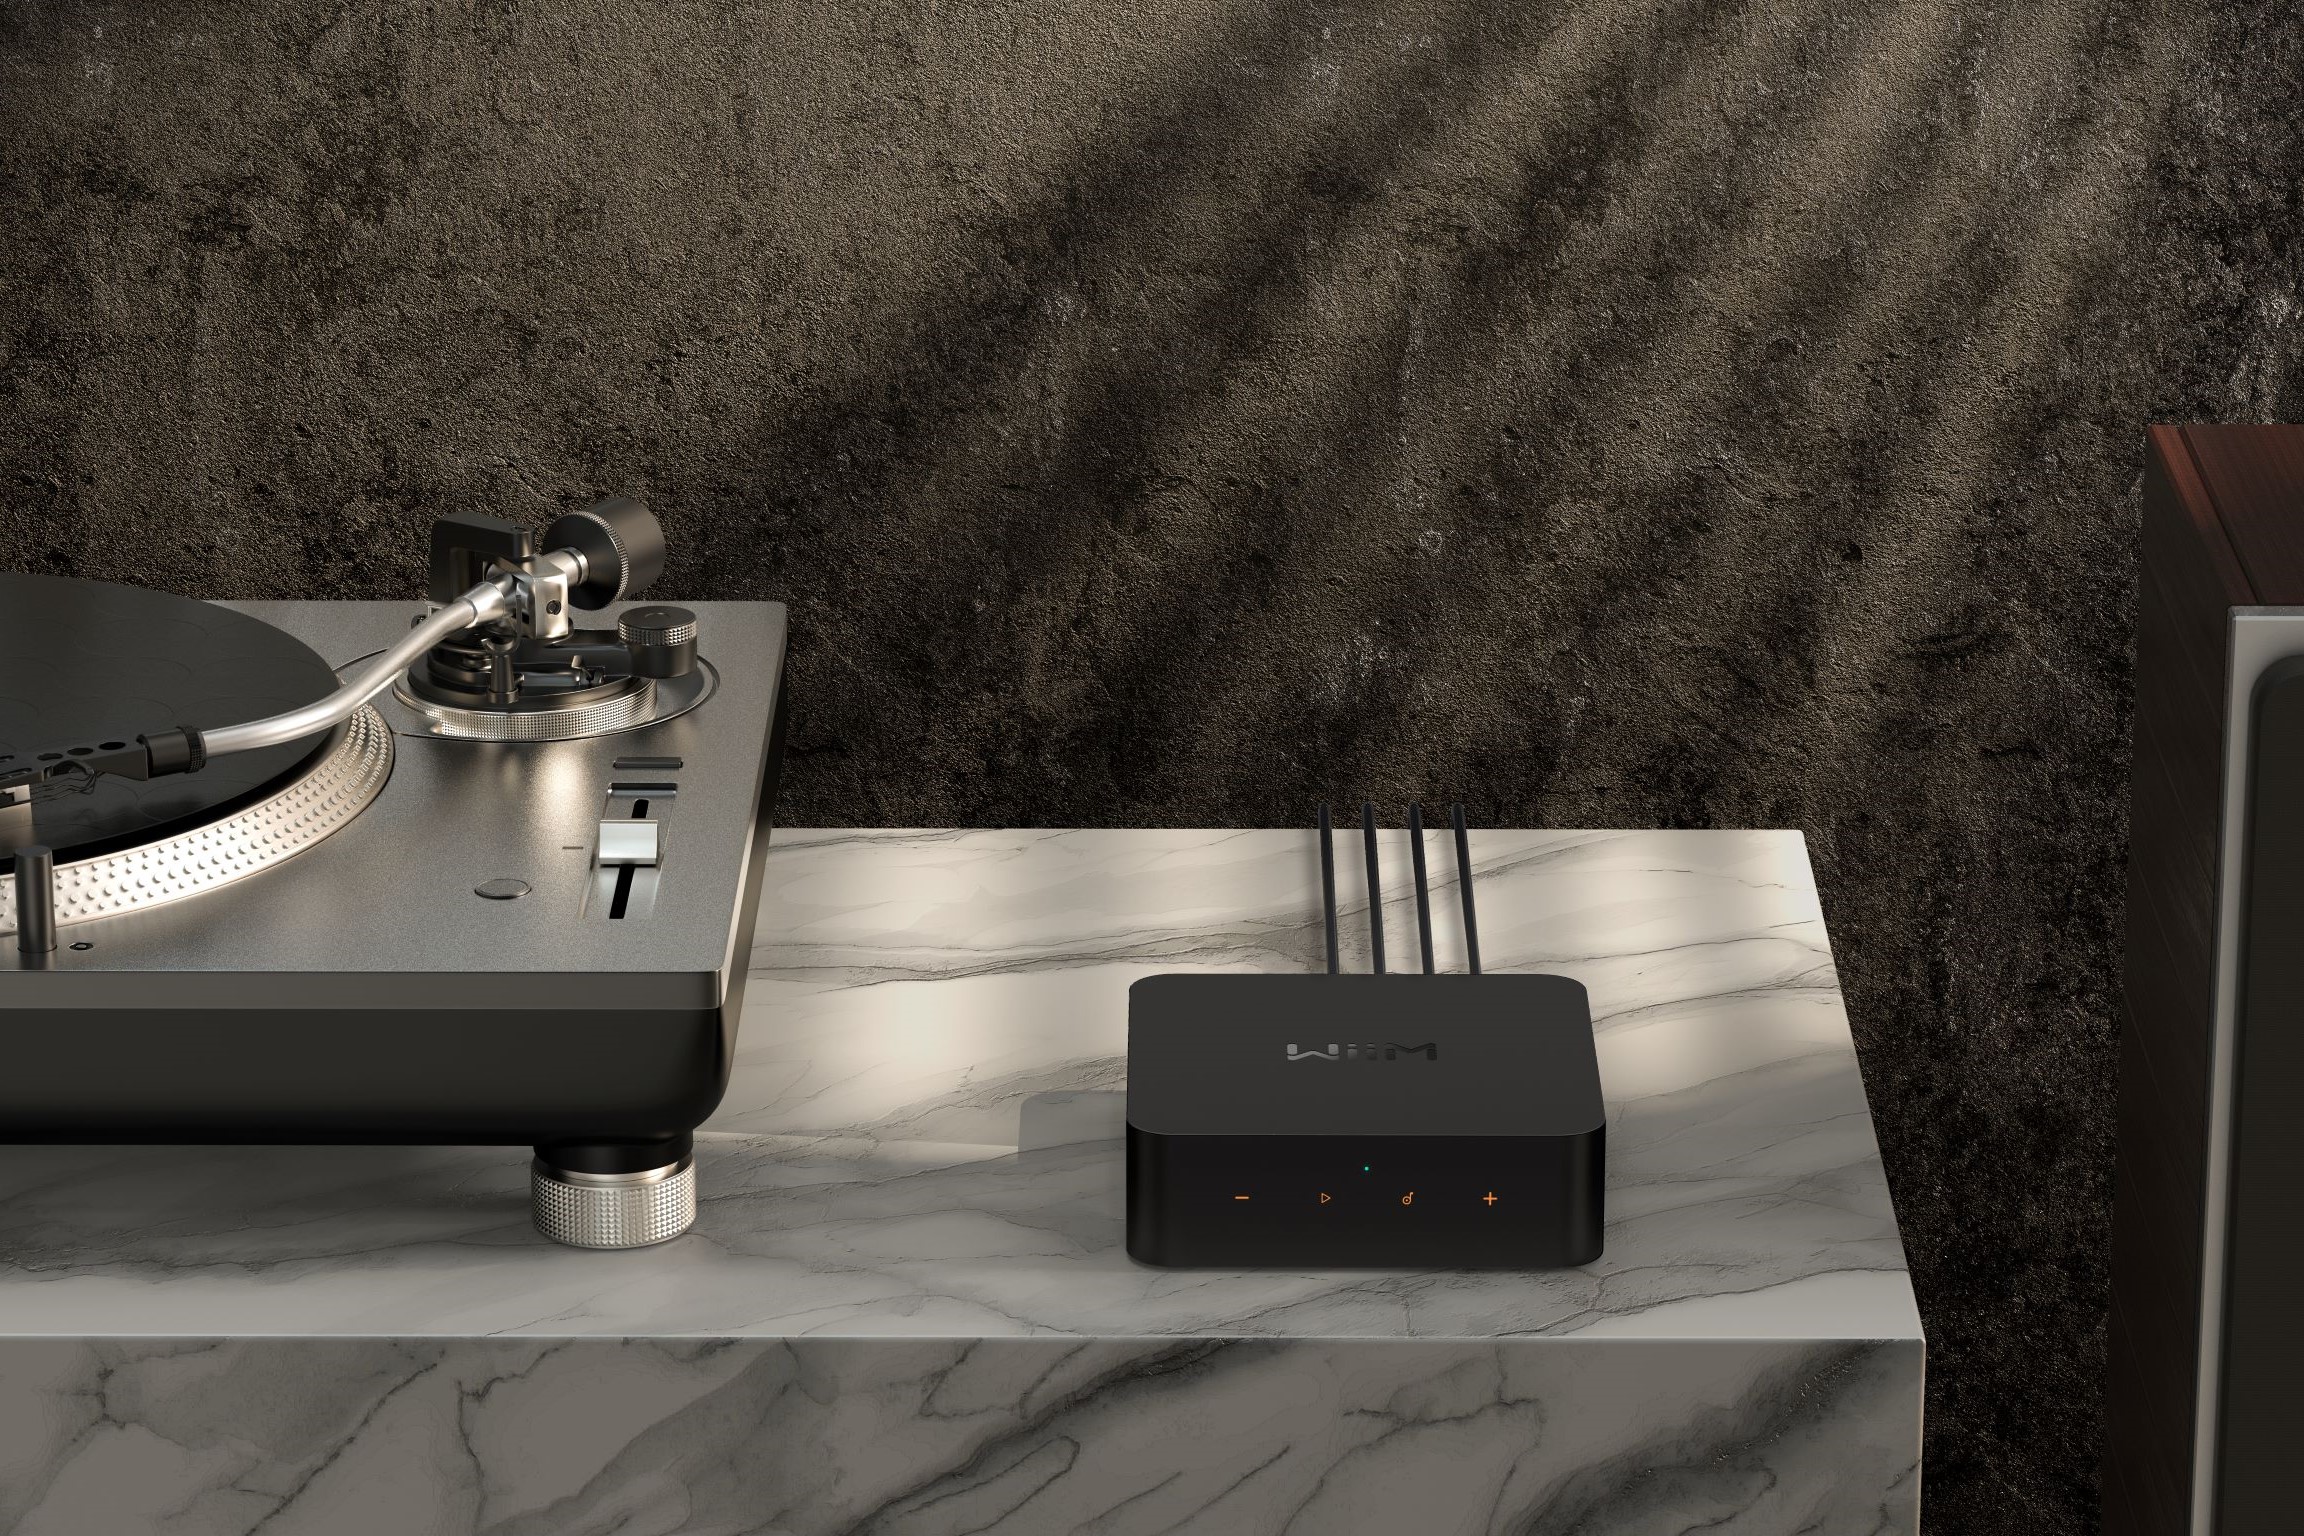 Wiim Pro Plus streamer targets audiophiles with upgraded DAC